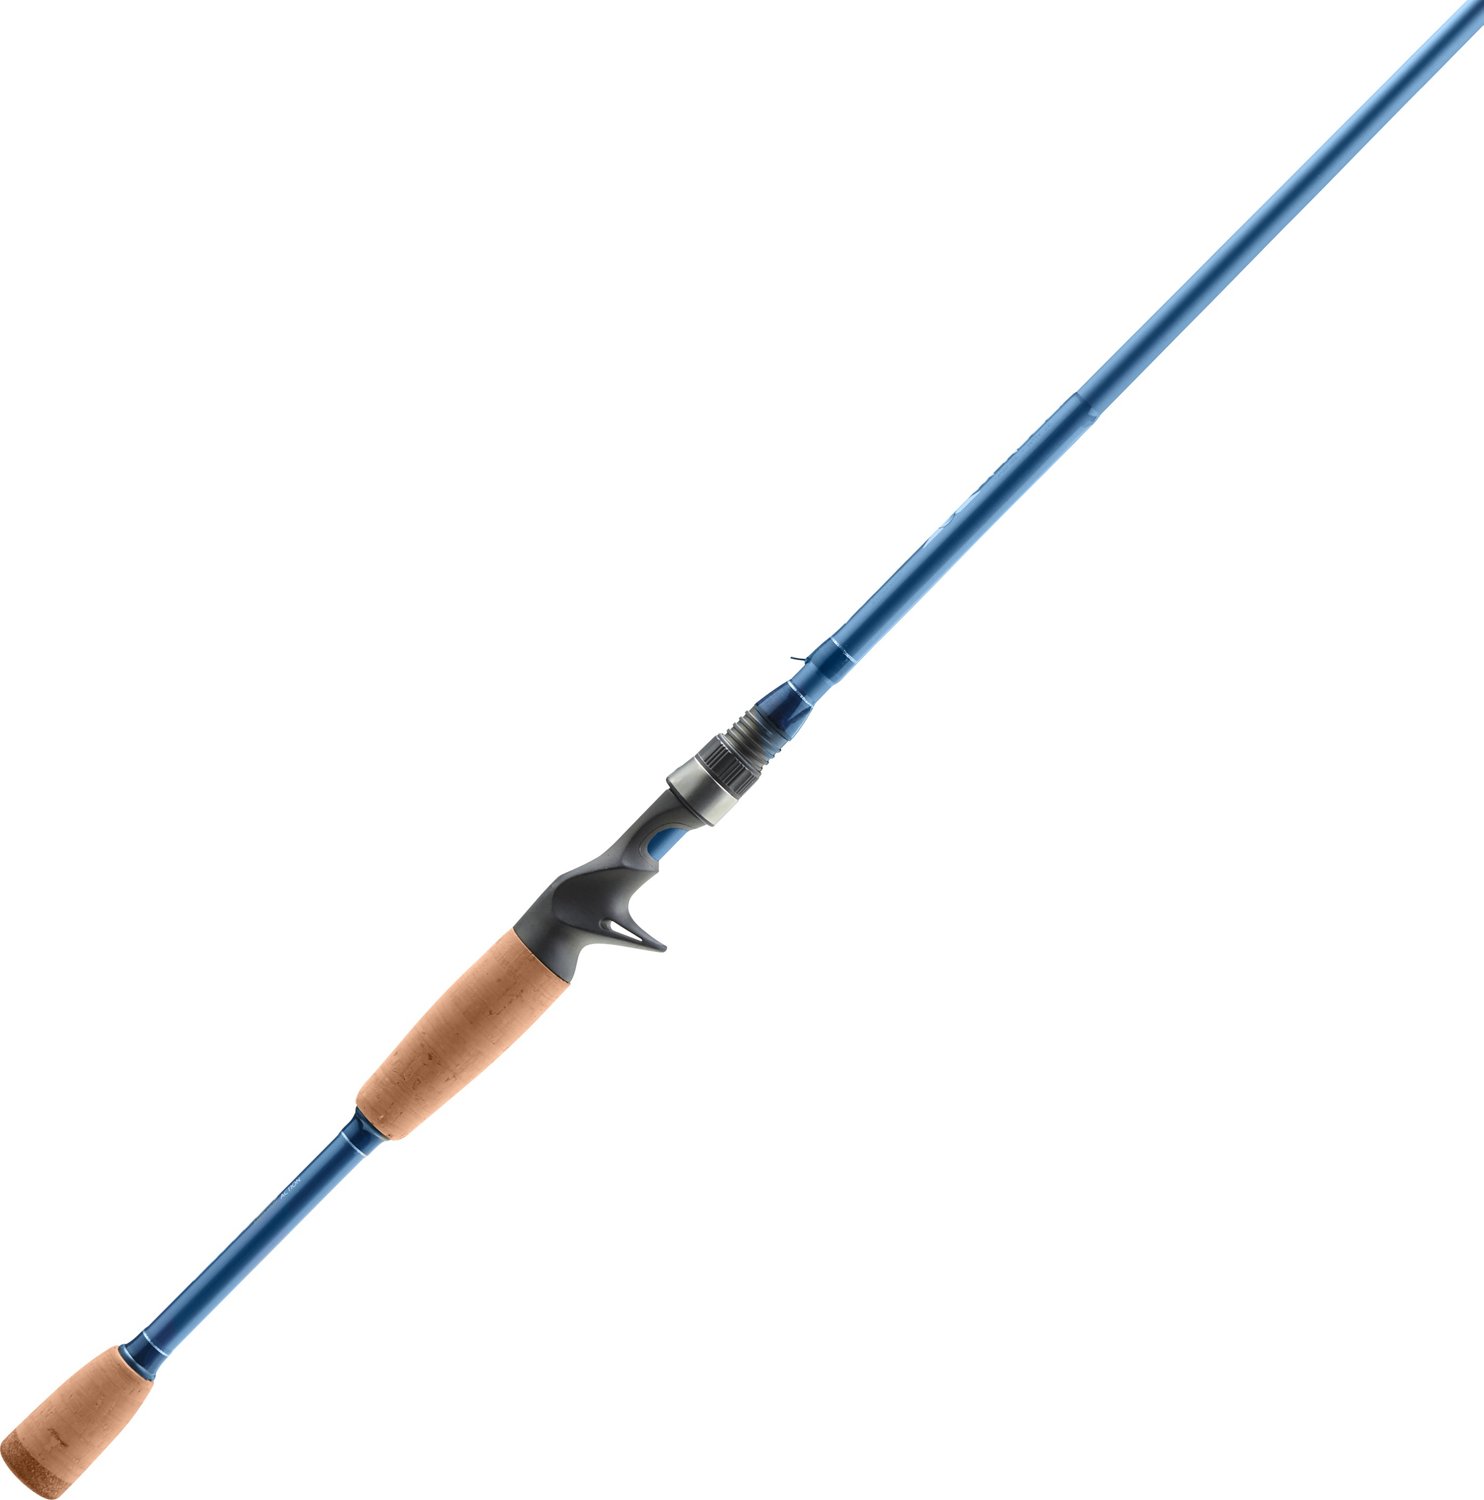 H2O XPRESS New Mentor 6 ft 6 in MH Rod and Reel Combo